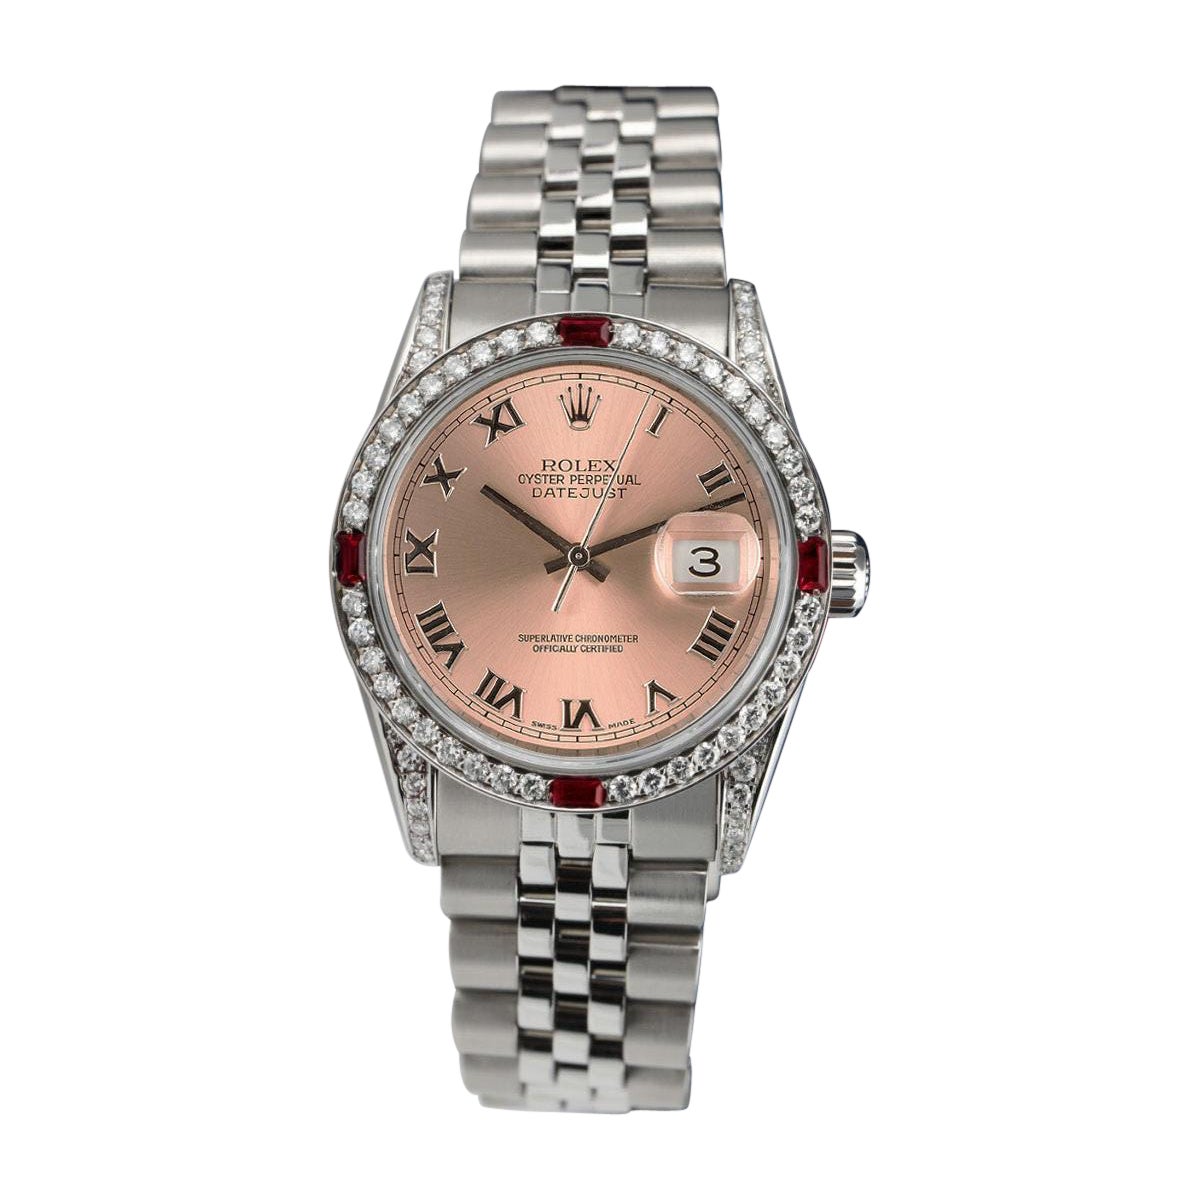 Rolex Datejust Salmon Roman Dial with Diamonds and Rubies Steel Watch For Sale